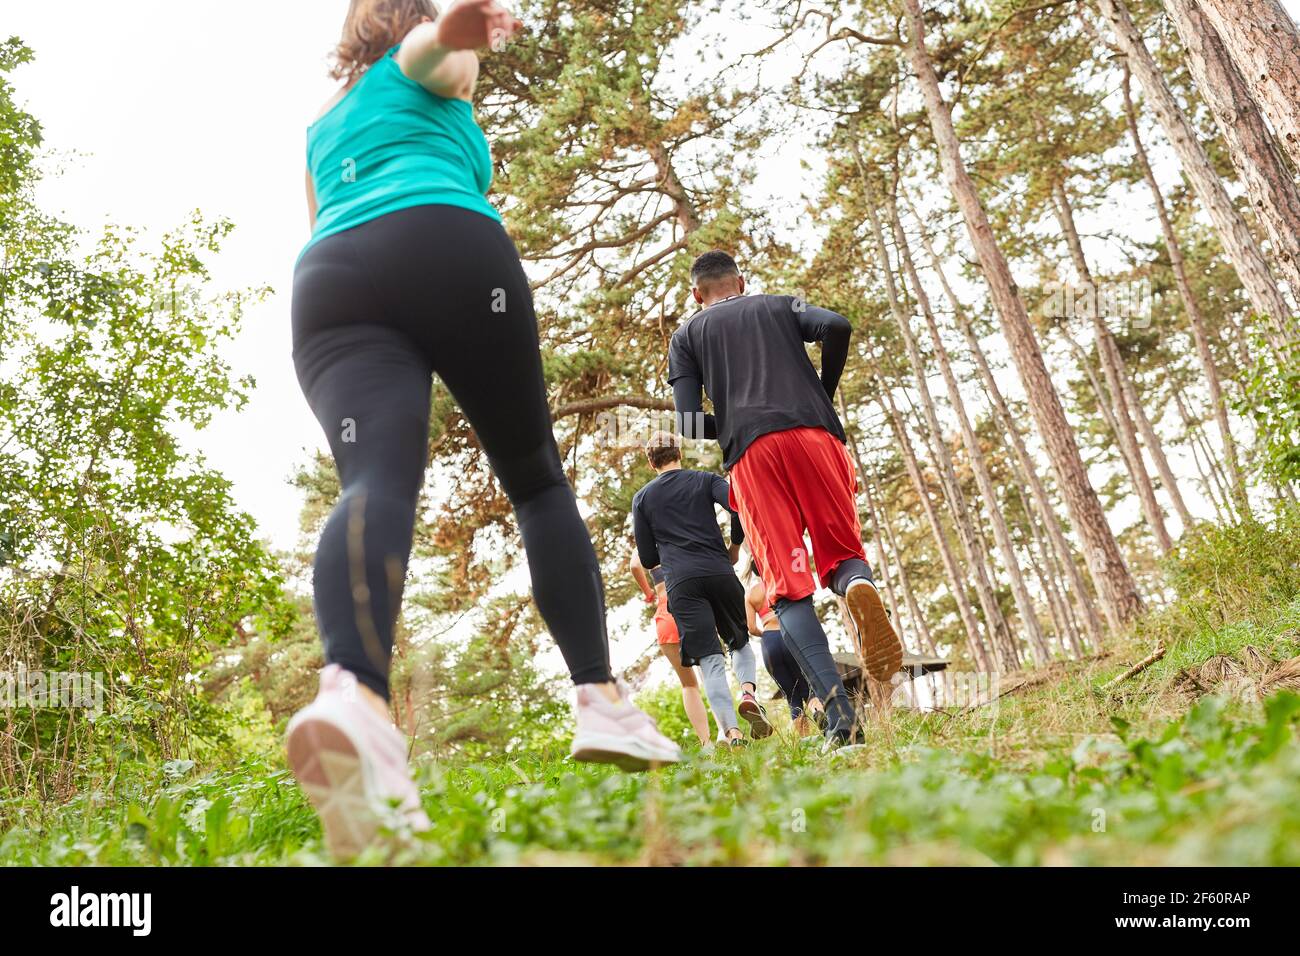 Young people jogging in nature as a cross-country run for endurance and fitness Stock Photo